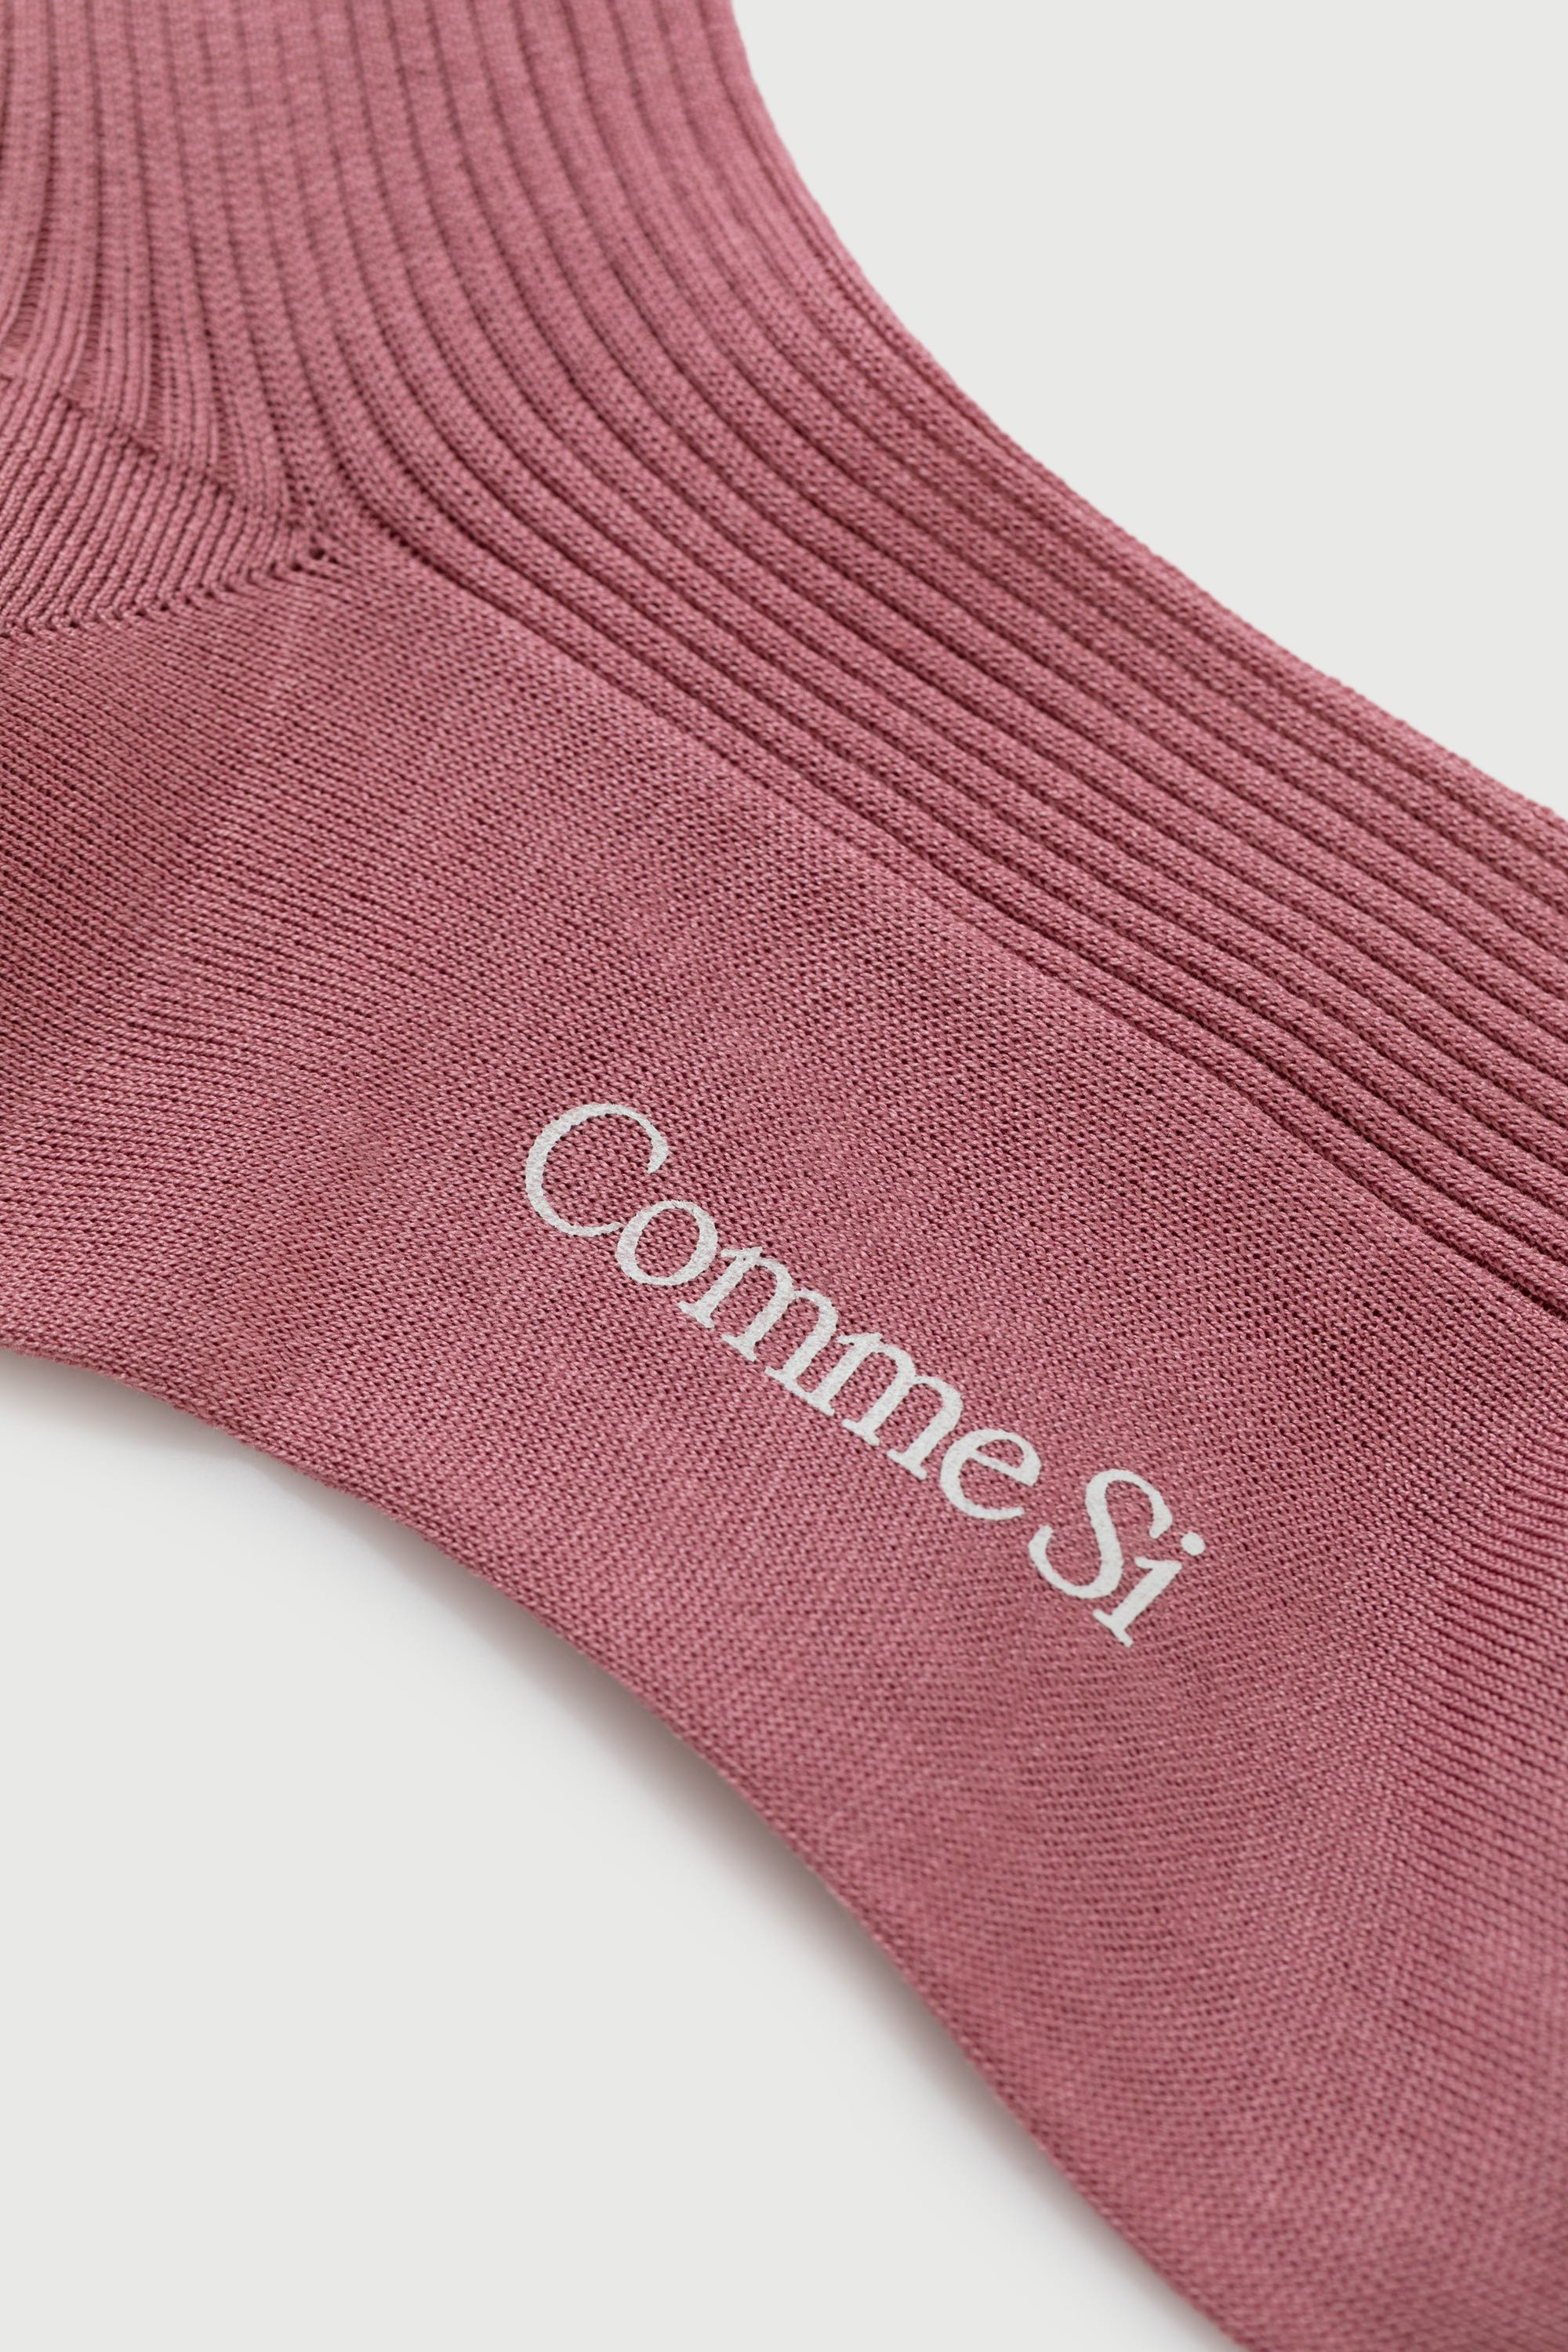 Footbed detail of The Agnelli Sock in Rose, Egyptian Cotton, by Comme Si